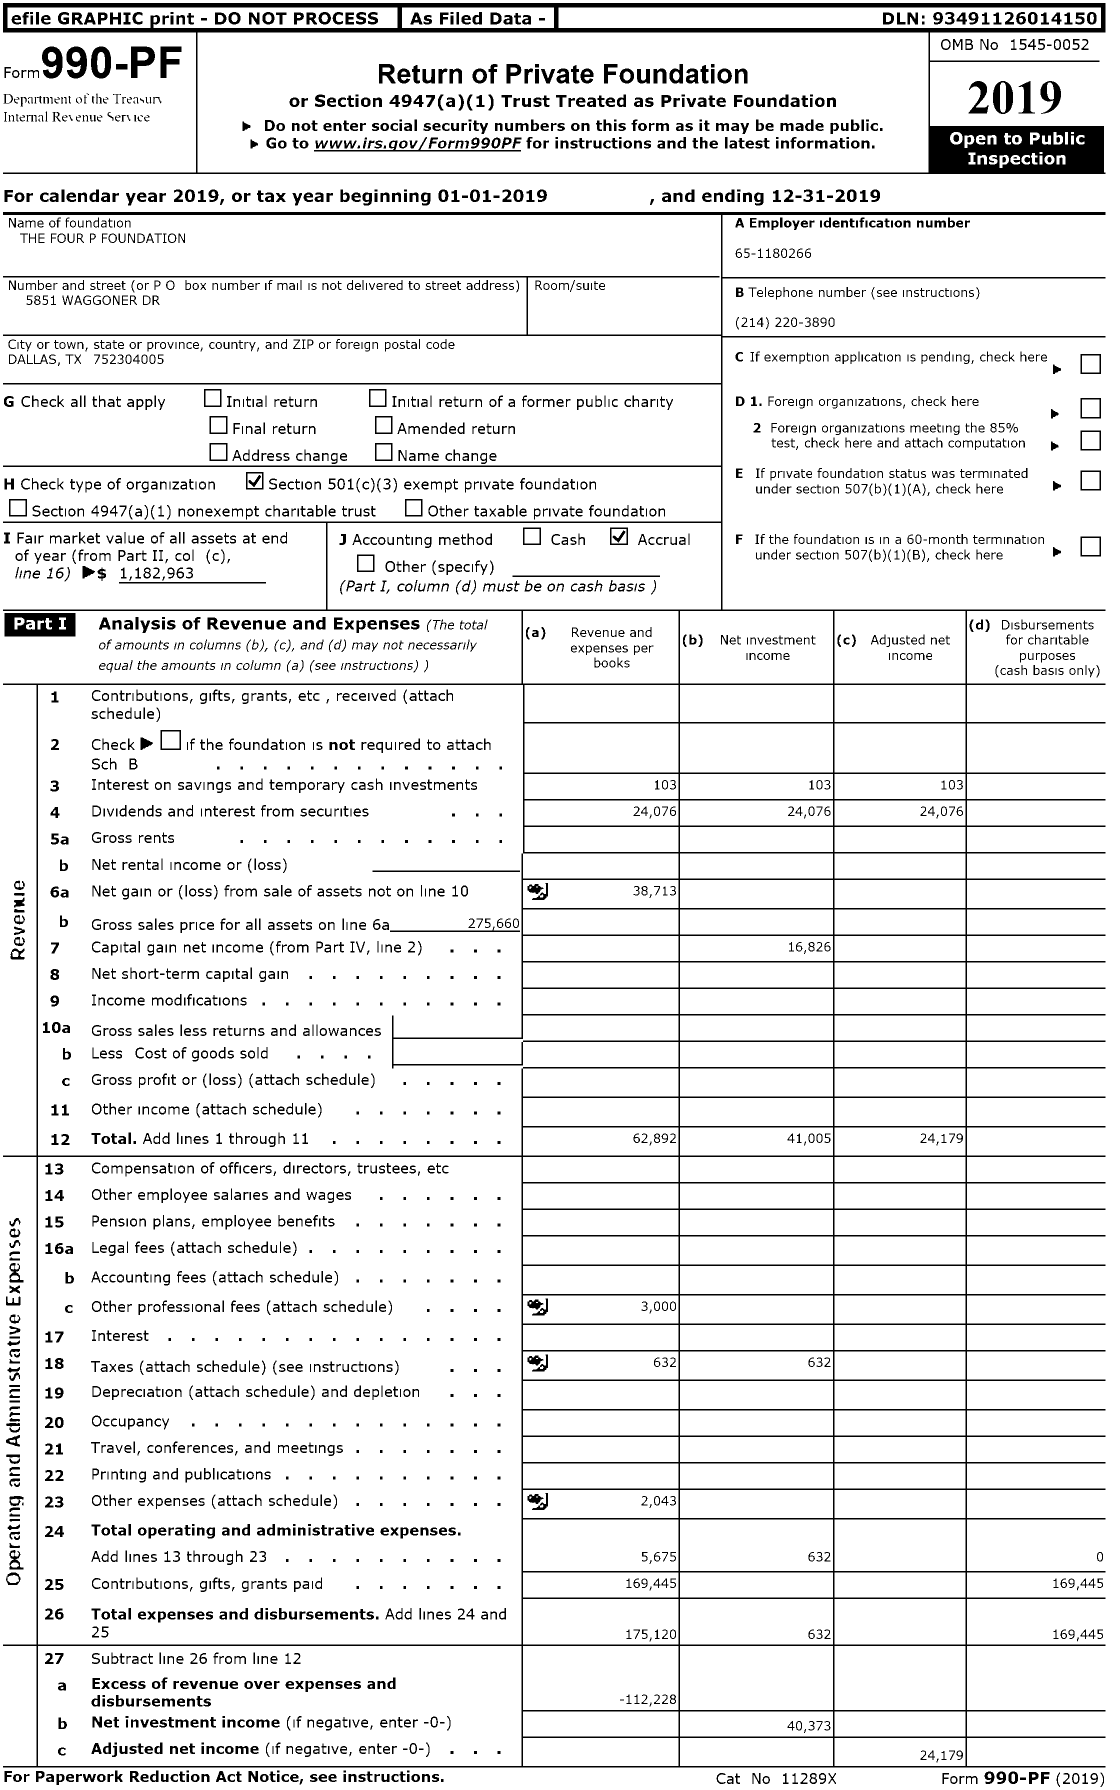 Image of first page of 2019 Form 990PR for The Four P Foundation